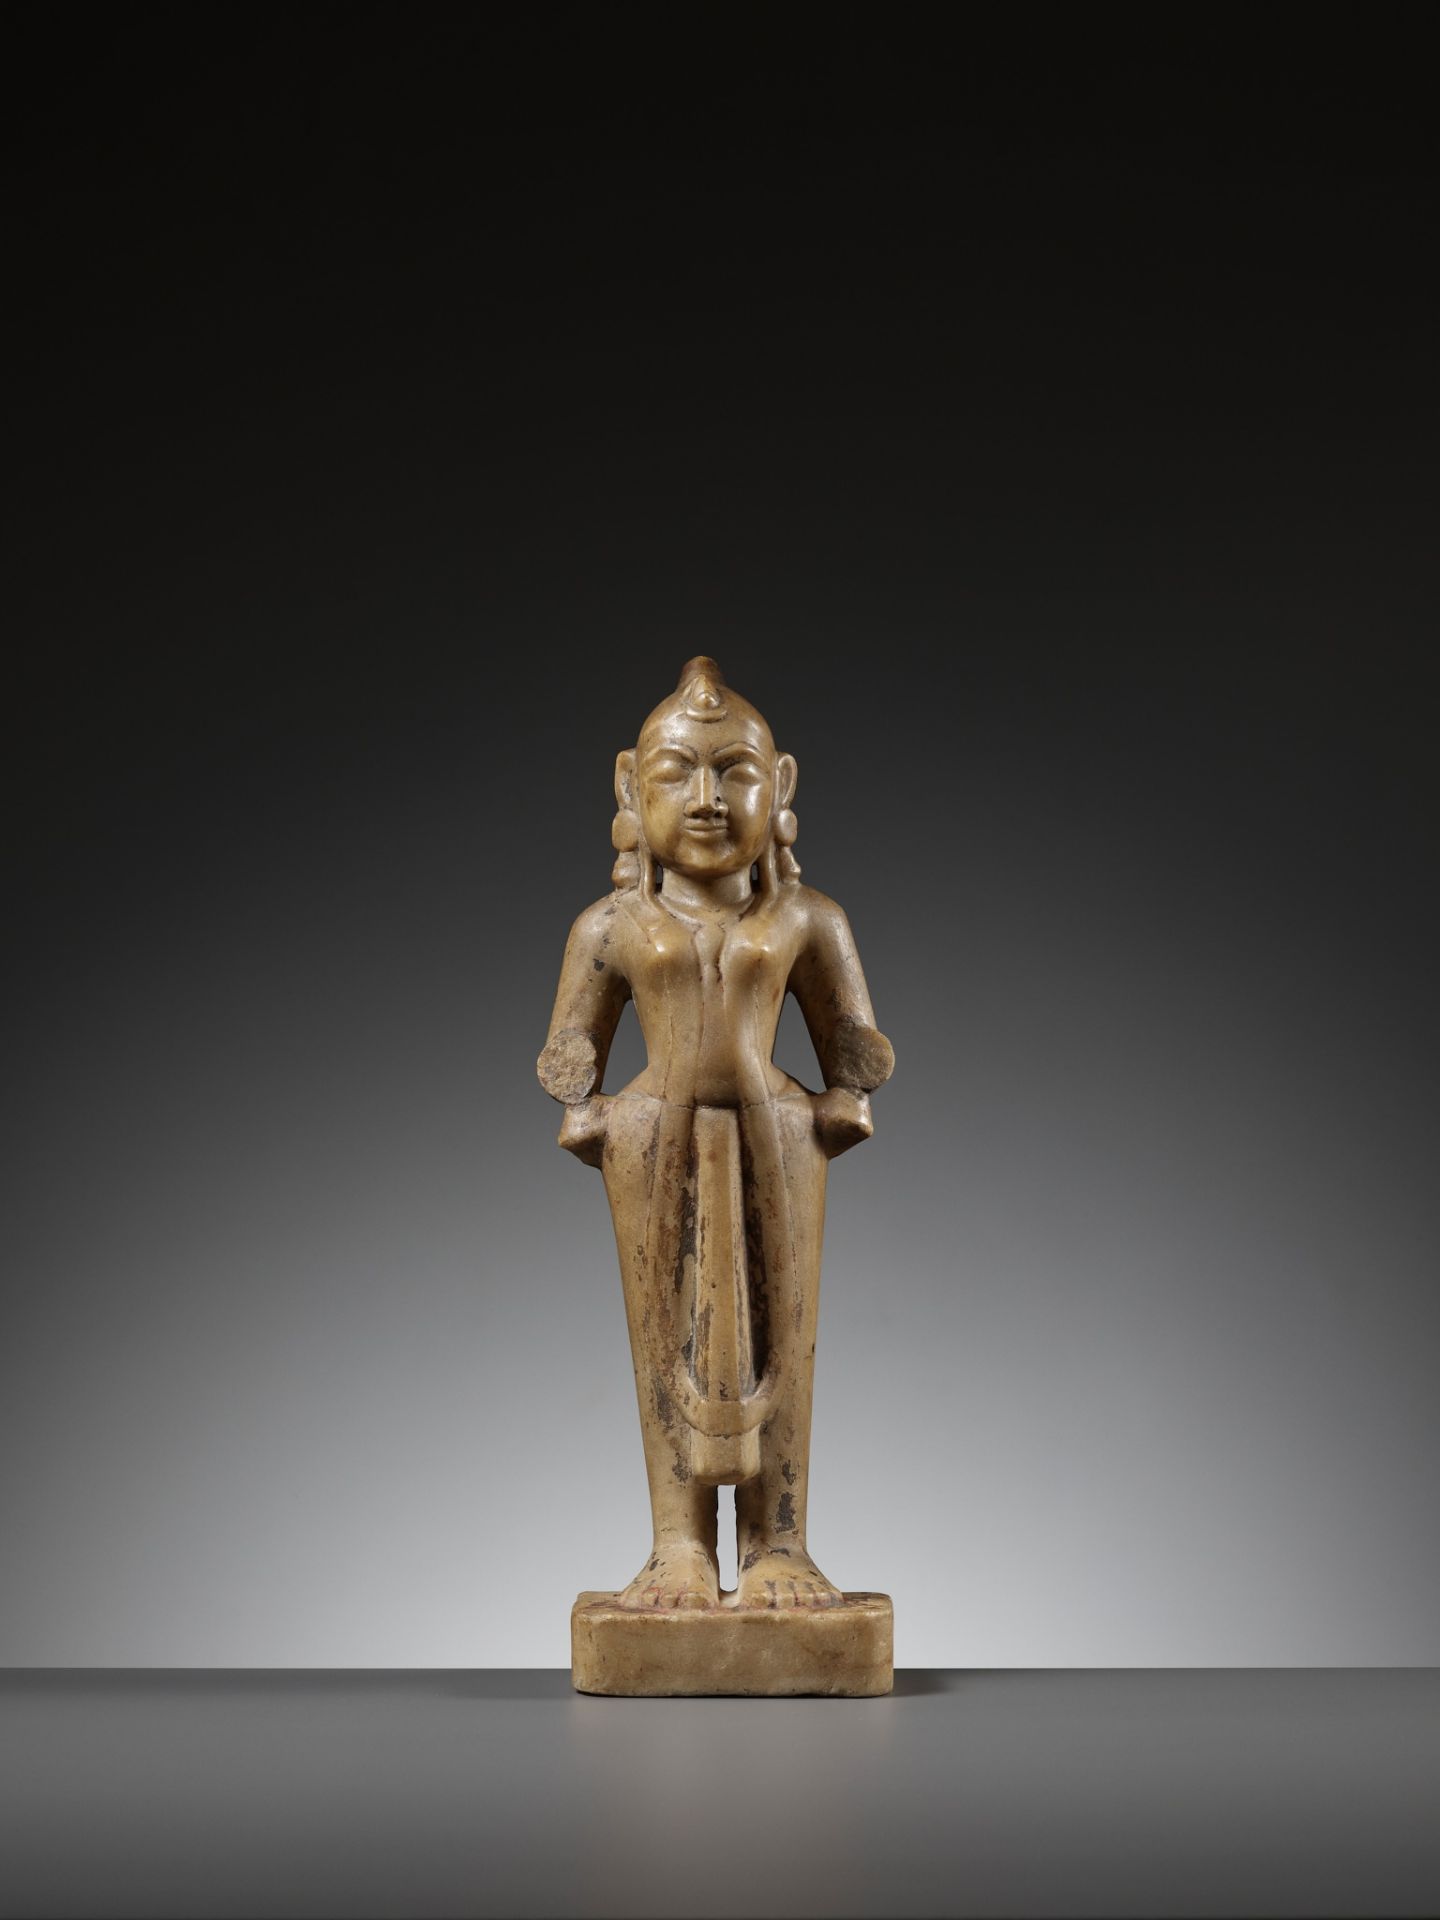 A MARBLE FIGURE OF RADHA, WESTERN INDIA, GUJARAT, 13TH-15TH CENTURY - Image 3 of 13